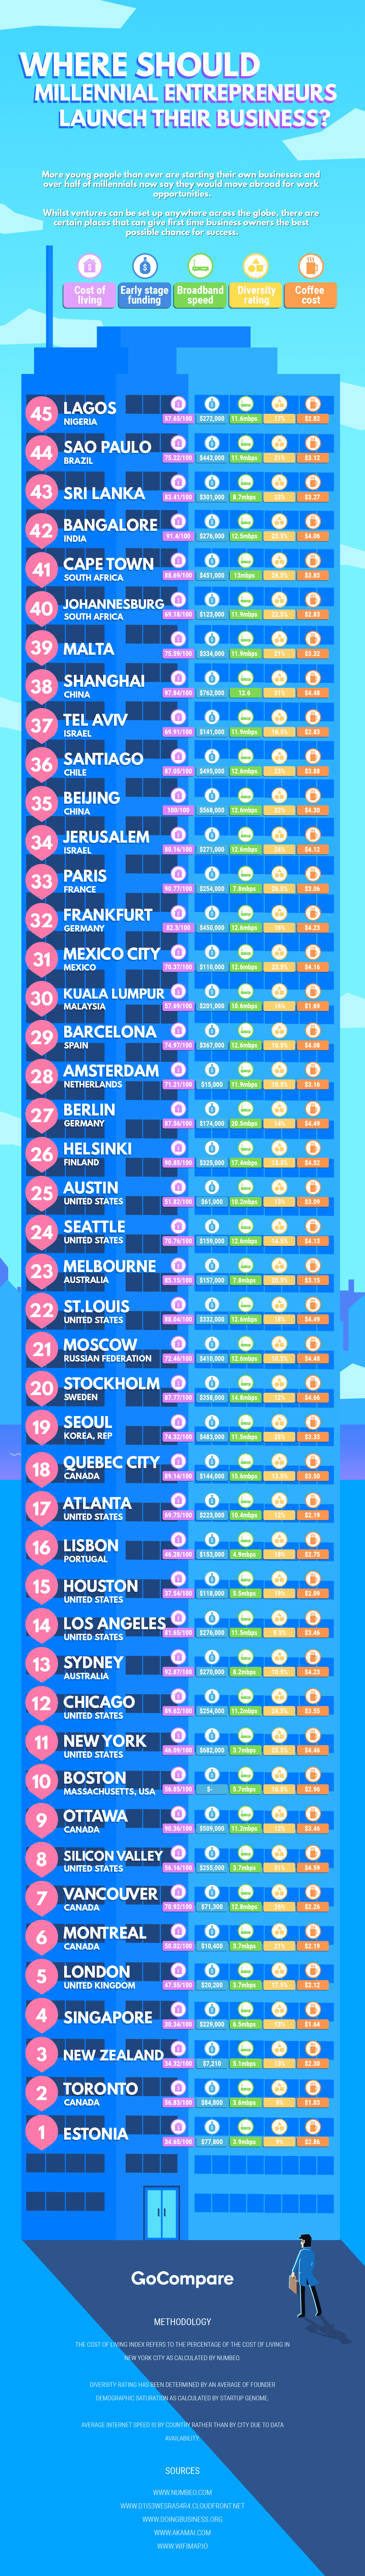 Best Cities For Young Entrepreneurs to Set Up a New Business.